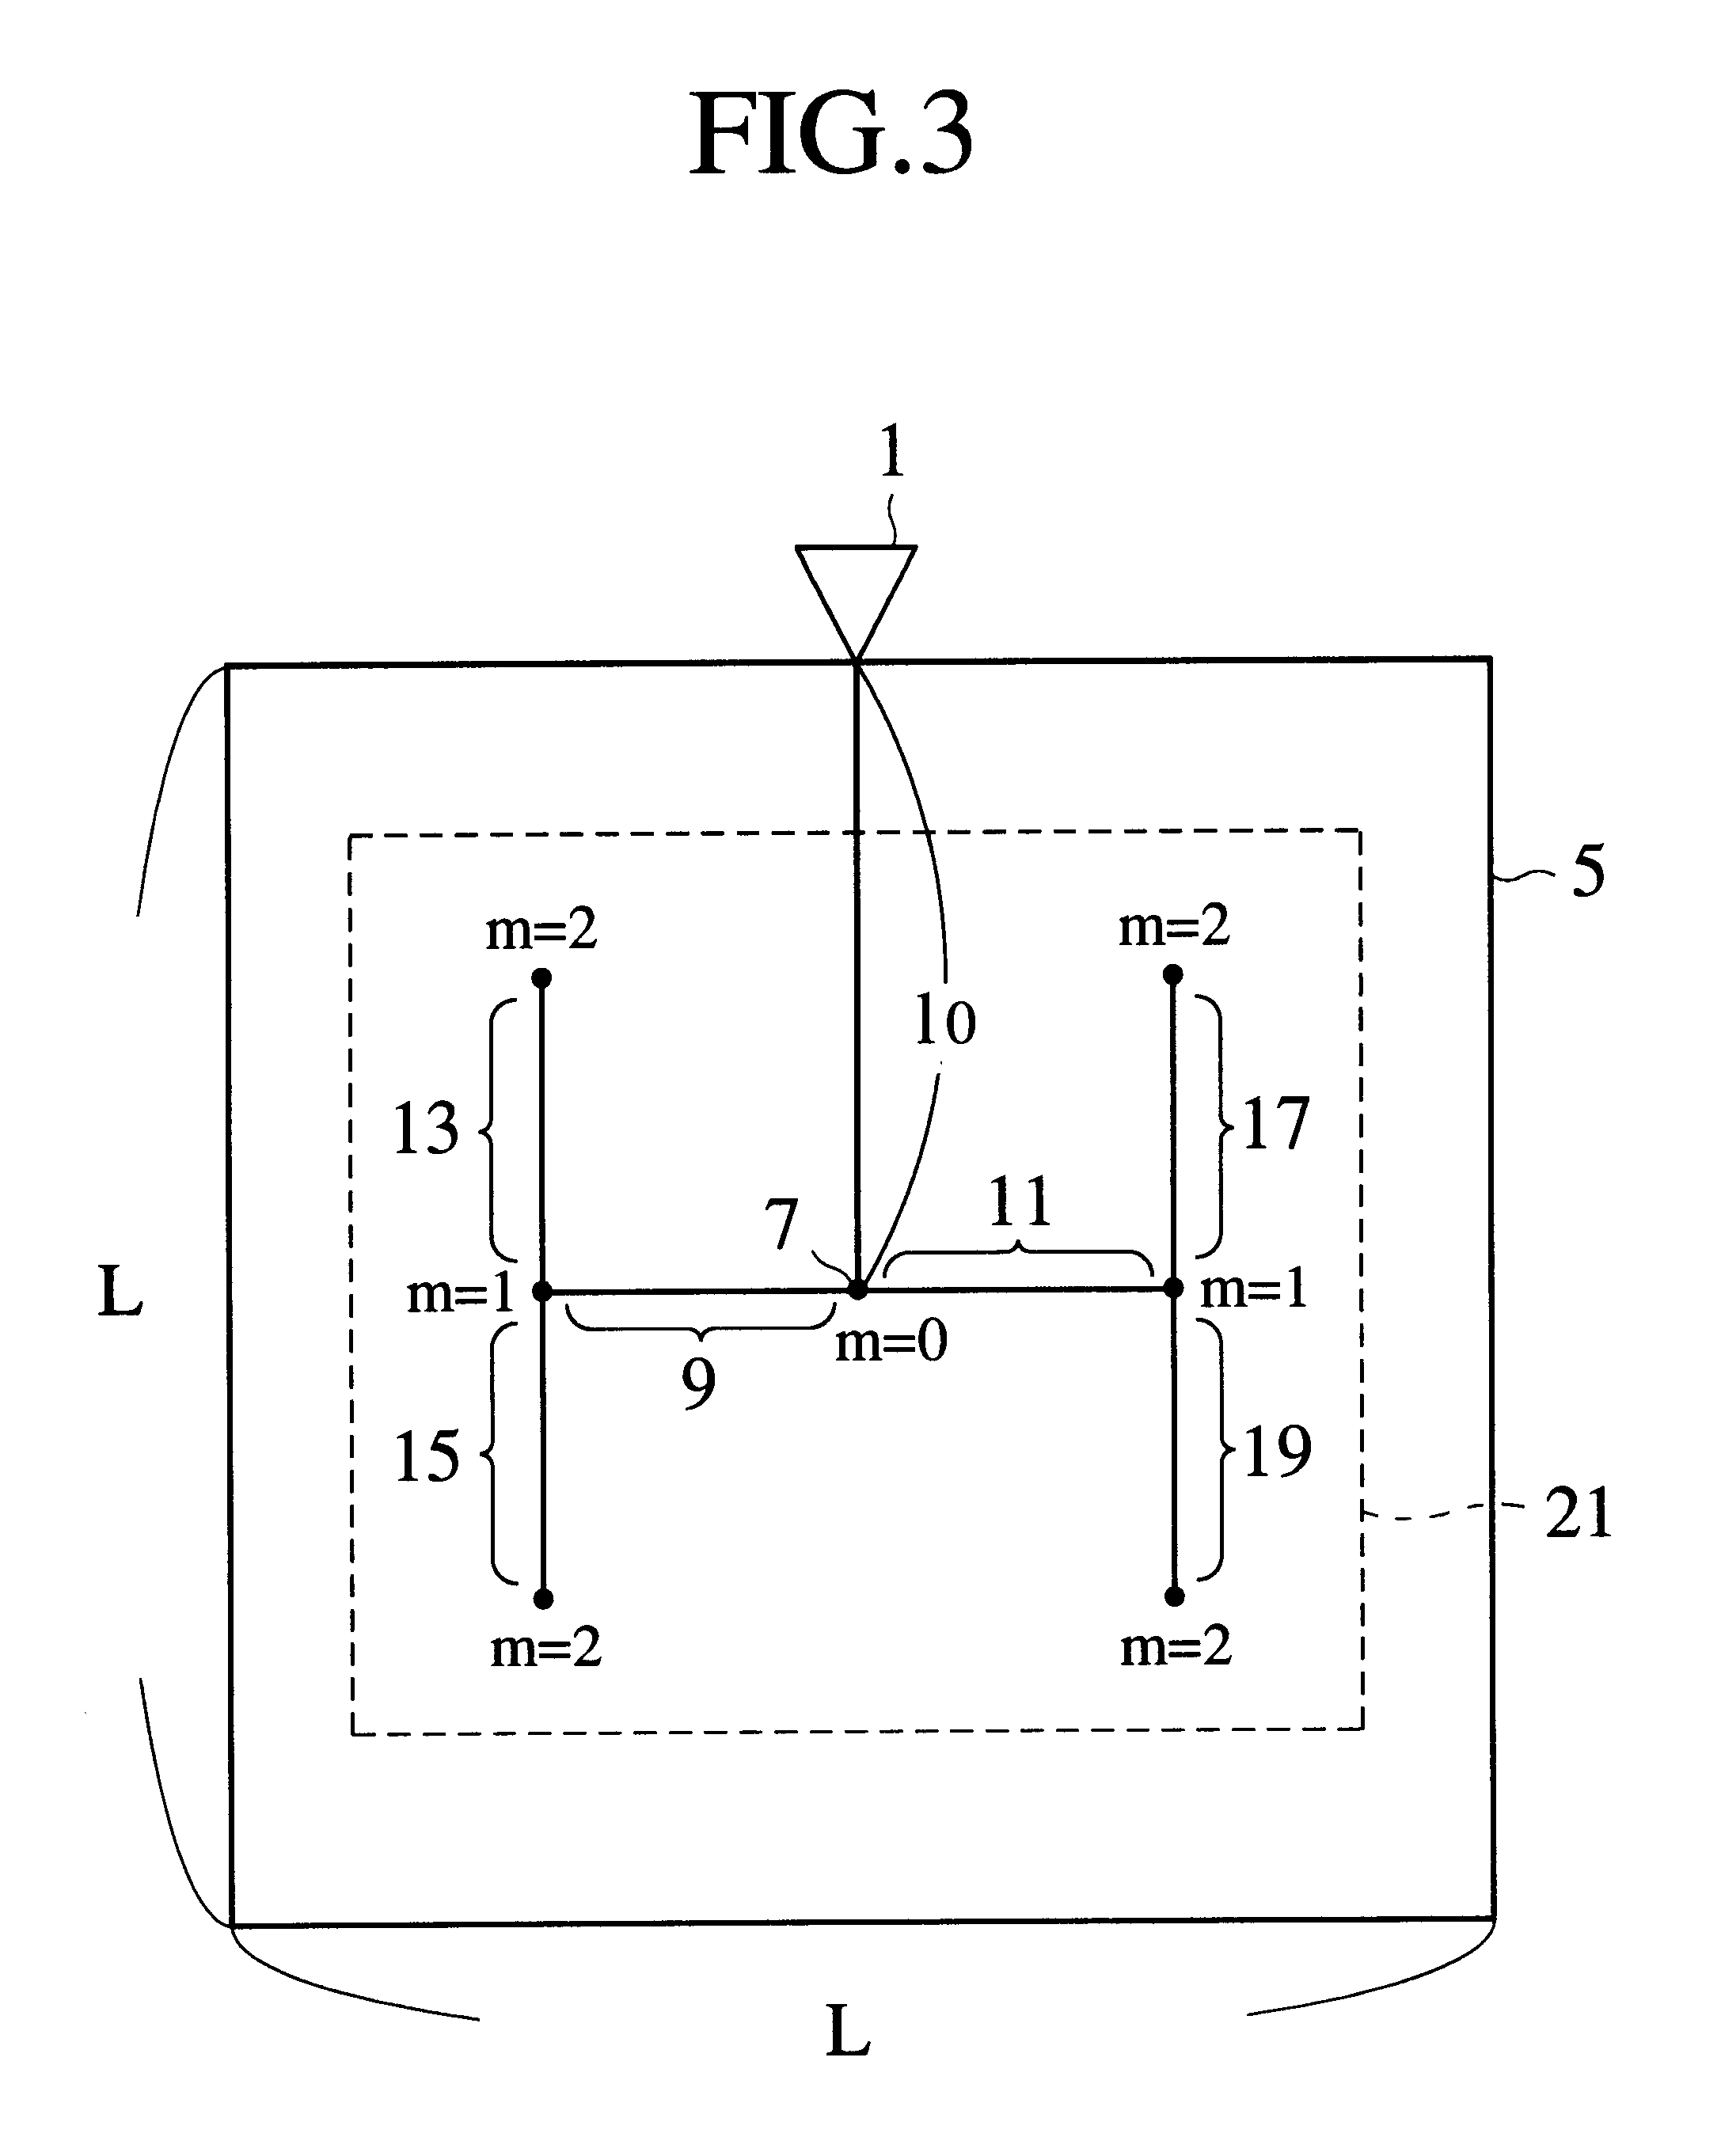 Method and apparatus for the optimization of a tree depth for clock distribution in semiconductor integrated circuits